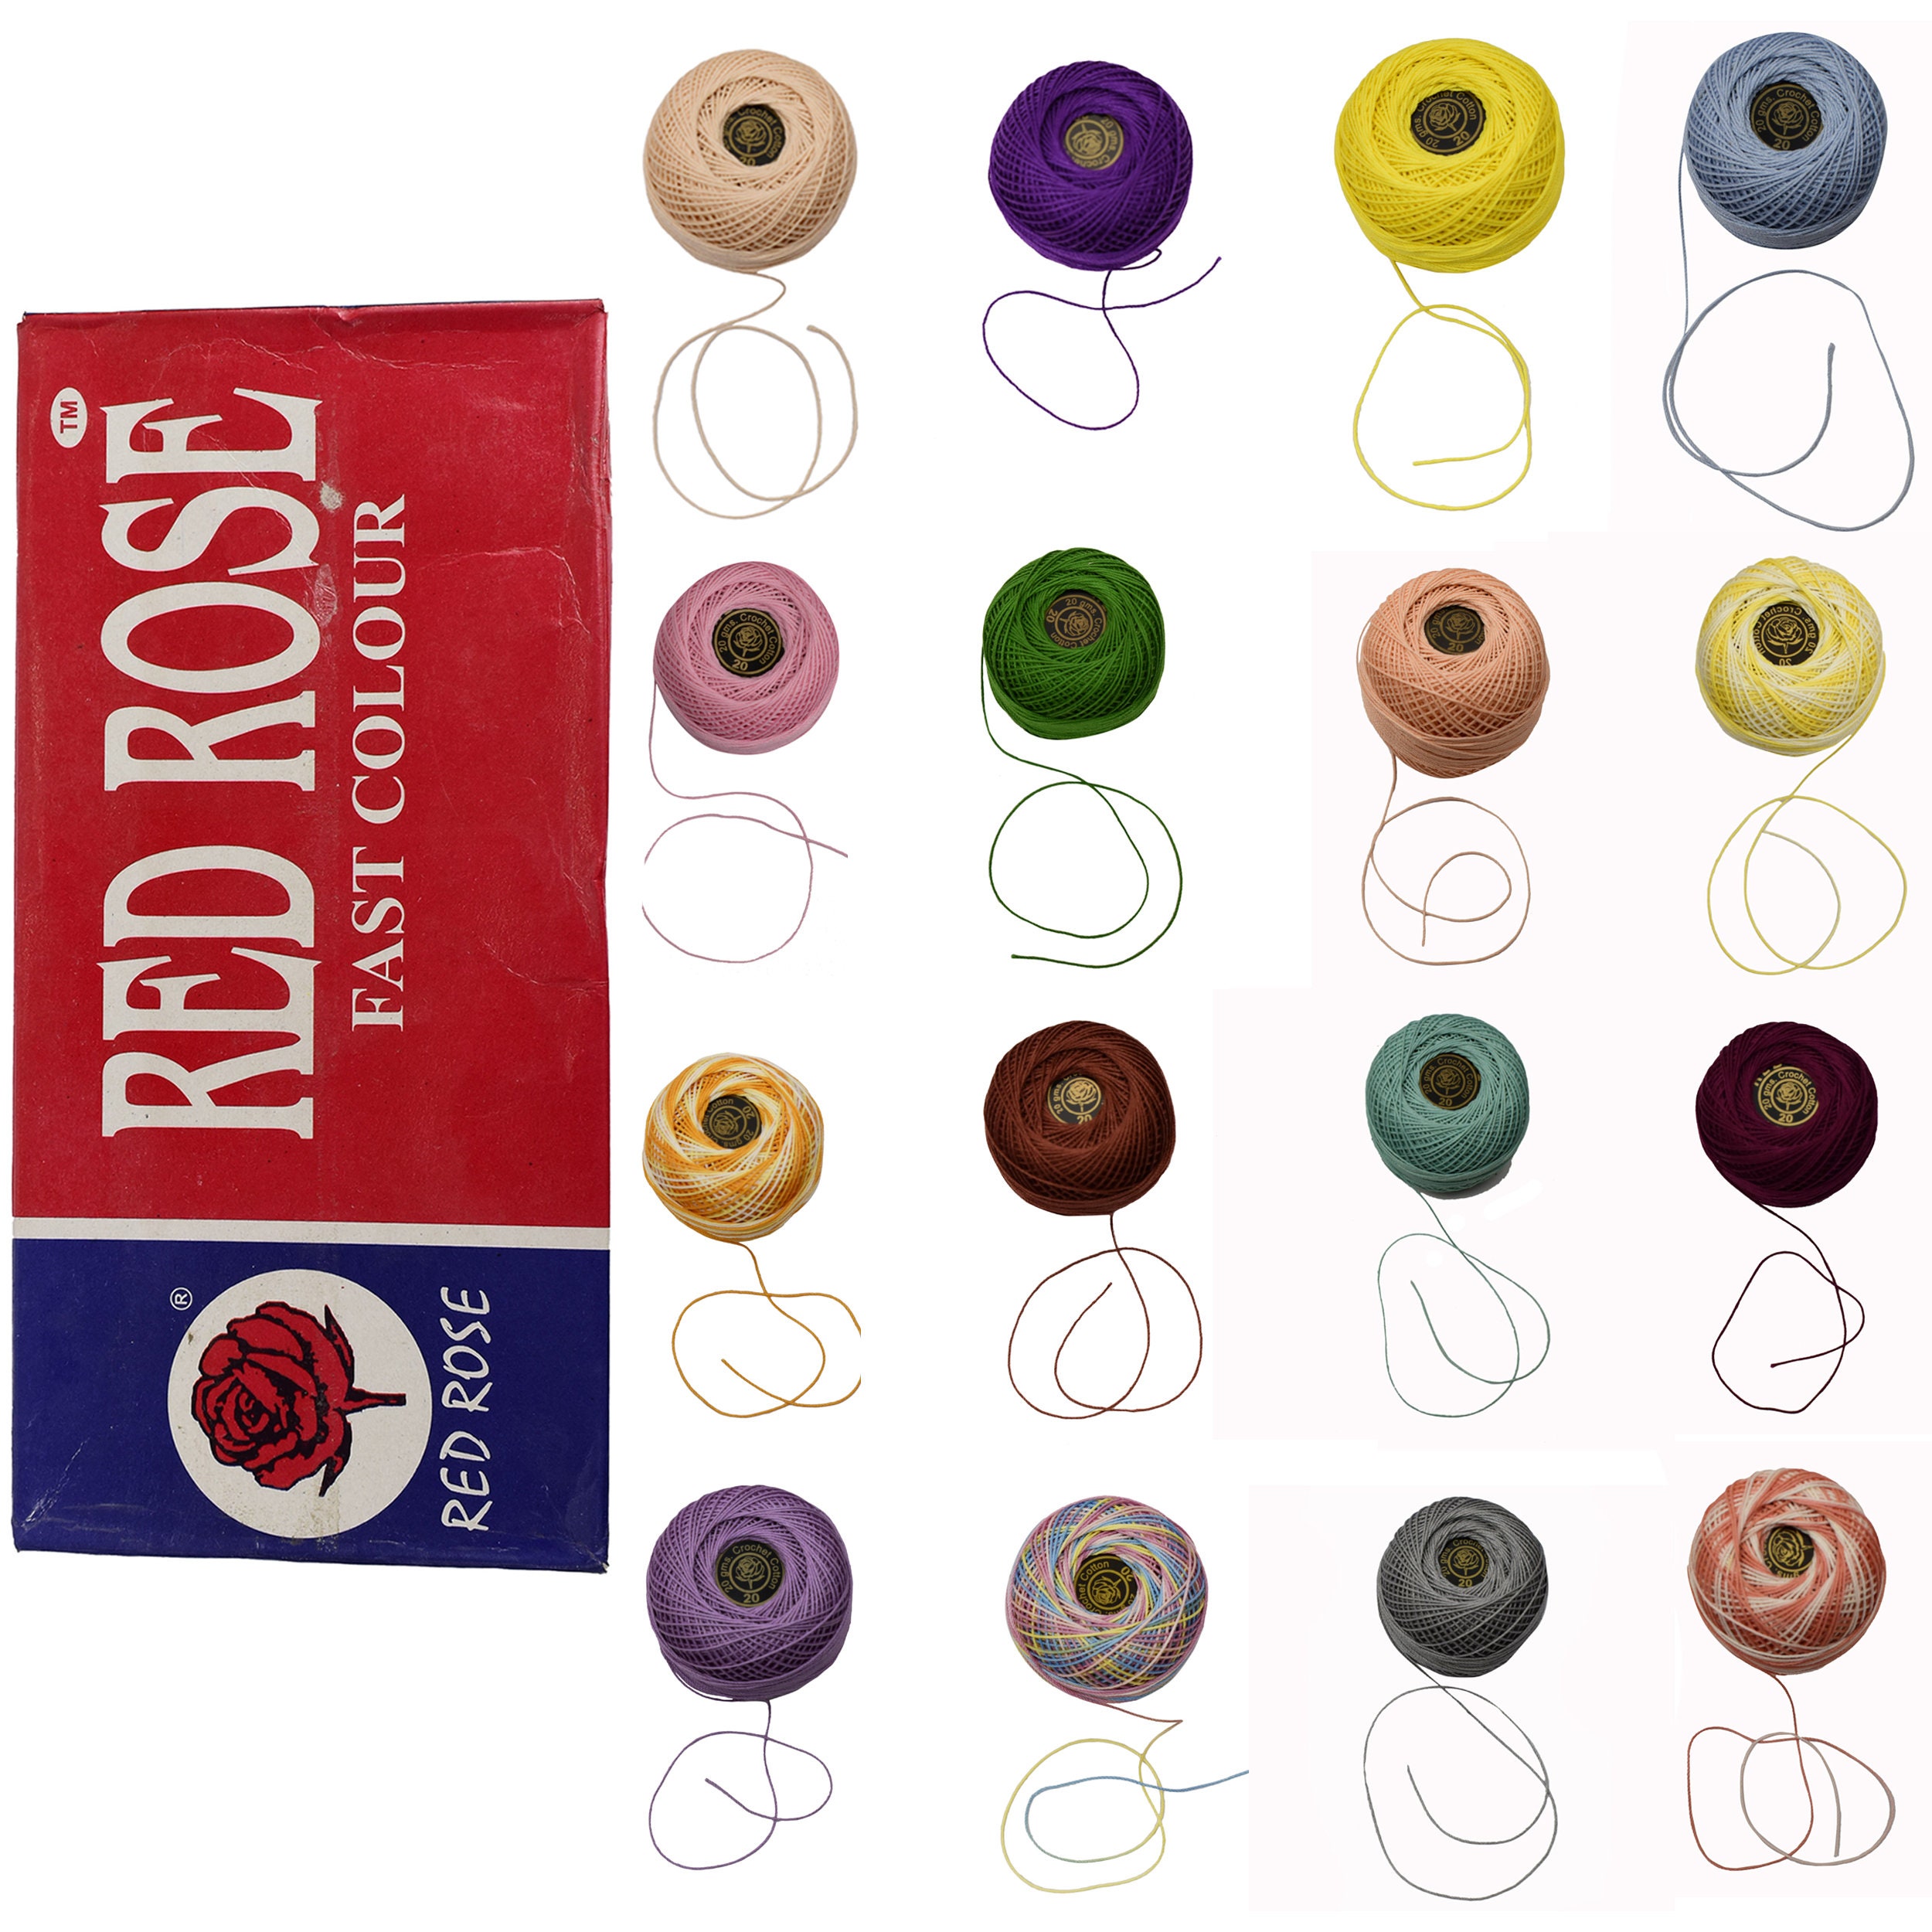 25 Anchor Embroidery Cotton Thread / Skeins / Floss in Green, Red, Blue,  Yellow, Brown Combinations -  Israel